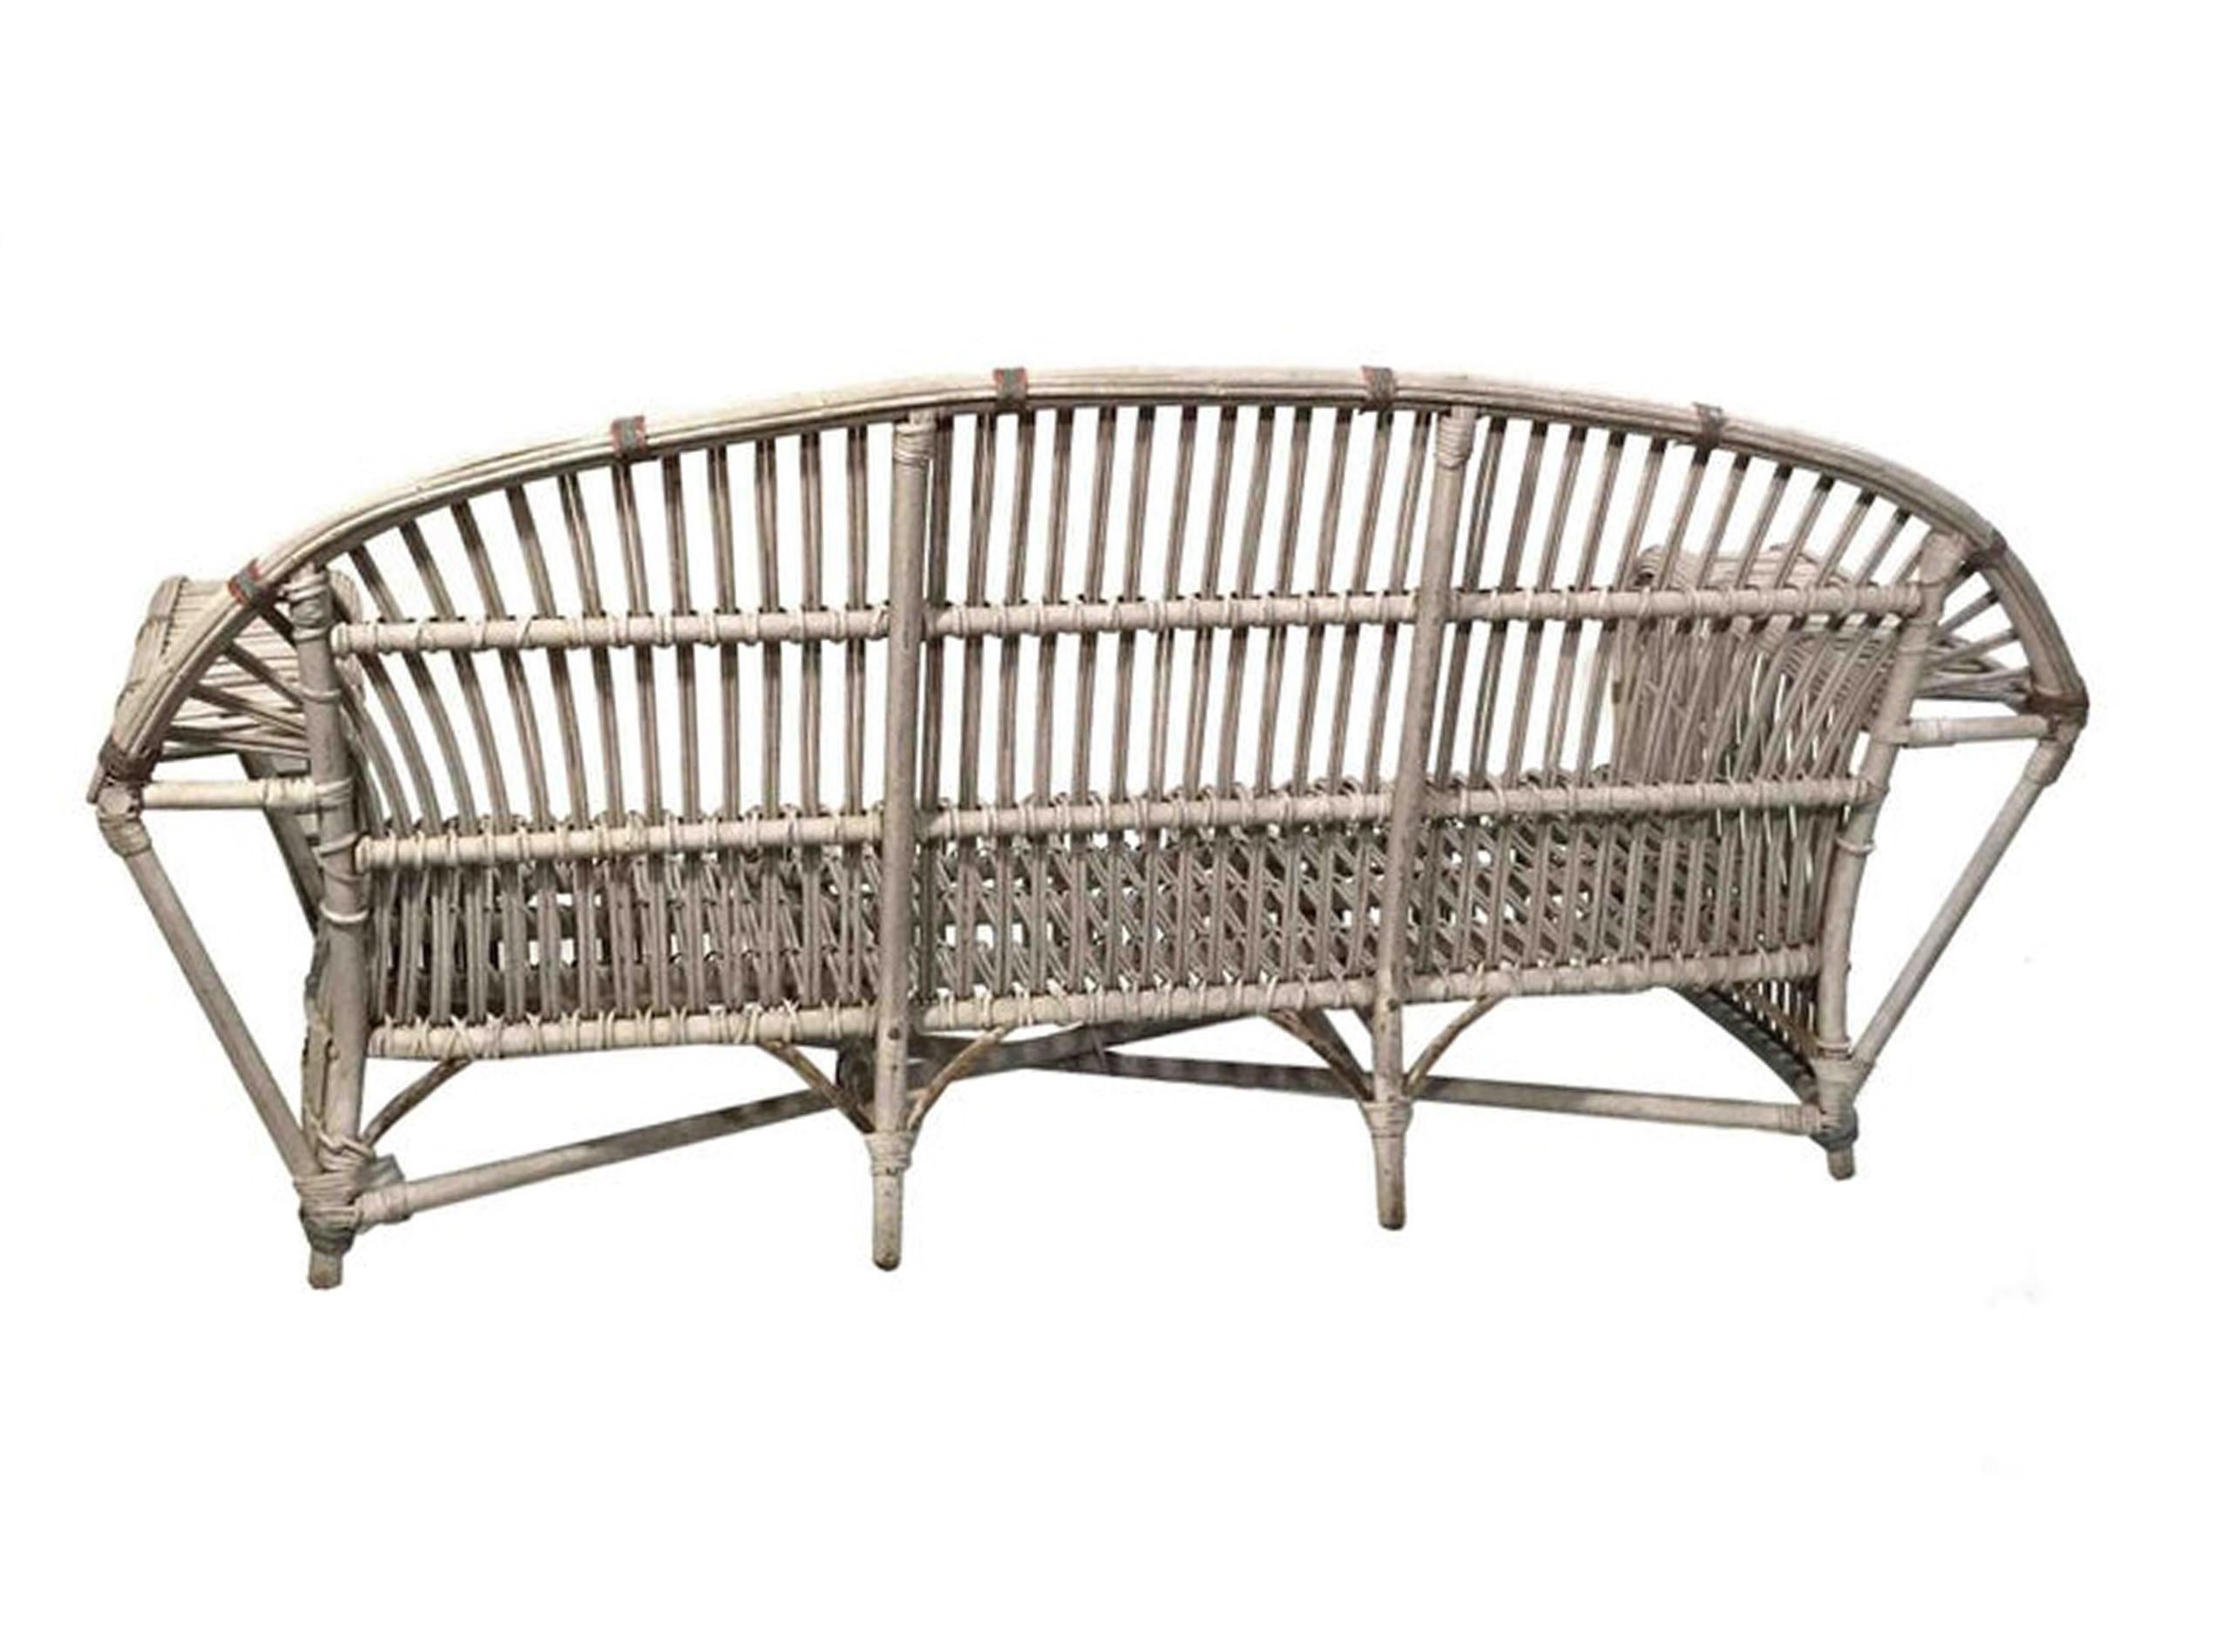 Woven Vintage Wicker Sofa For Sale